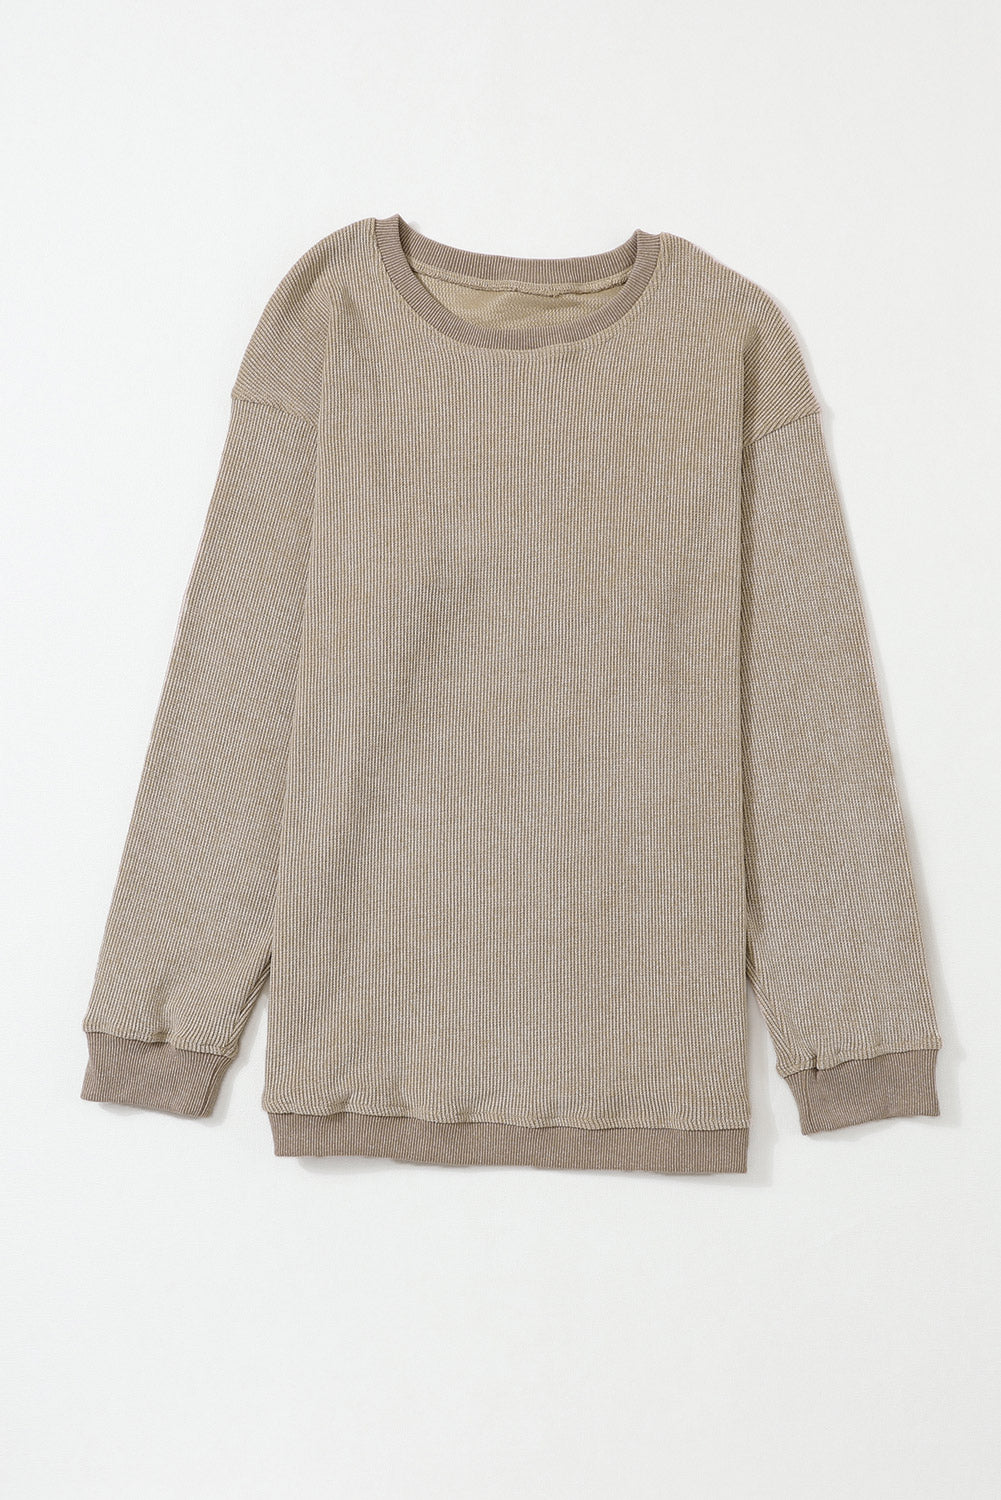 Khaki Solid Ribbed Knit Round Neck Pullover Sweatshirt - Dixie Hike & Style